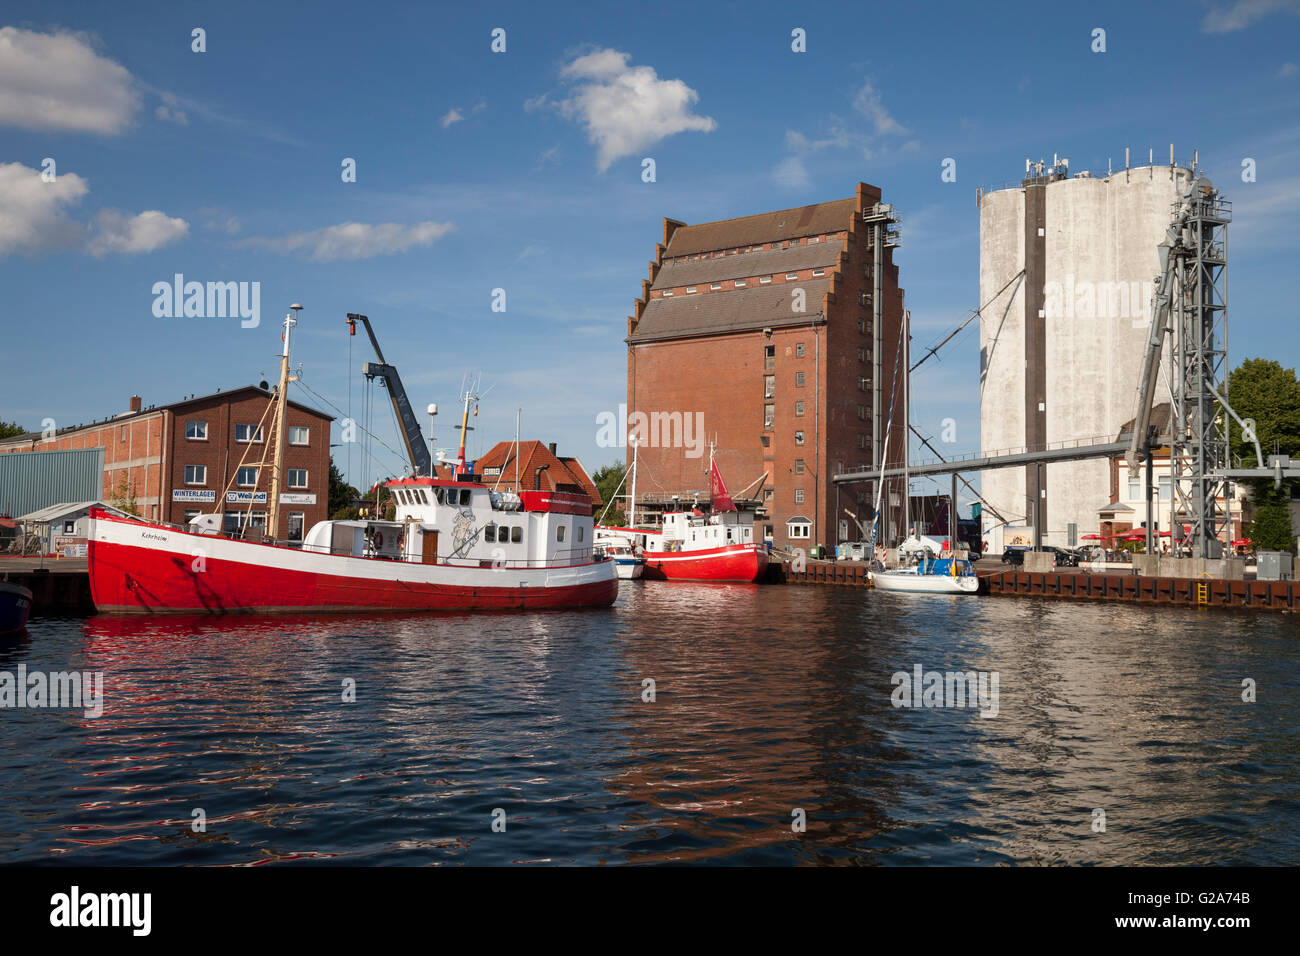 Fishing boats and granaries in the fishing port, Burgstaaken, Fehmarn island, Schleswig-Holstein, Germany Stock Photo